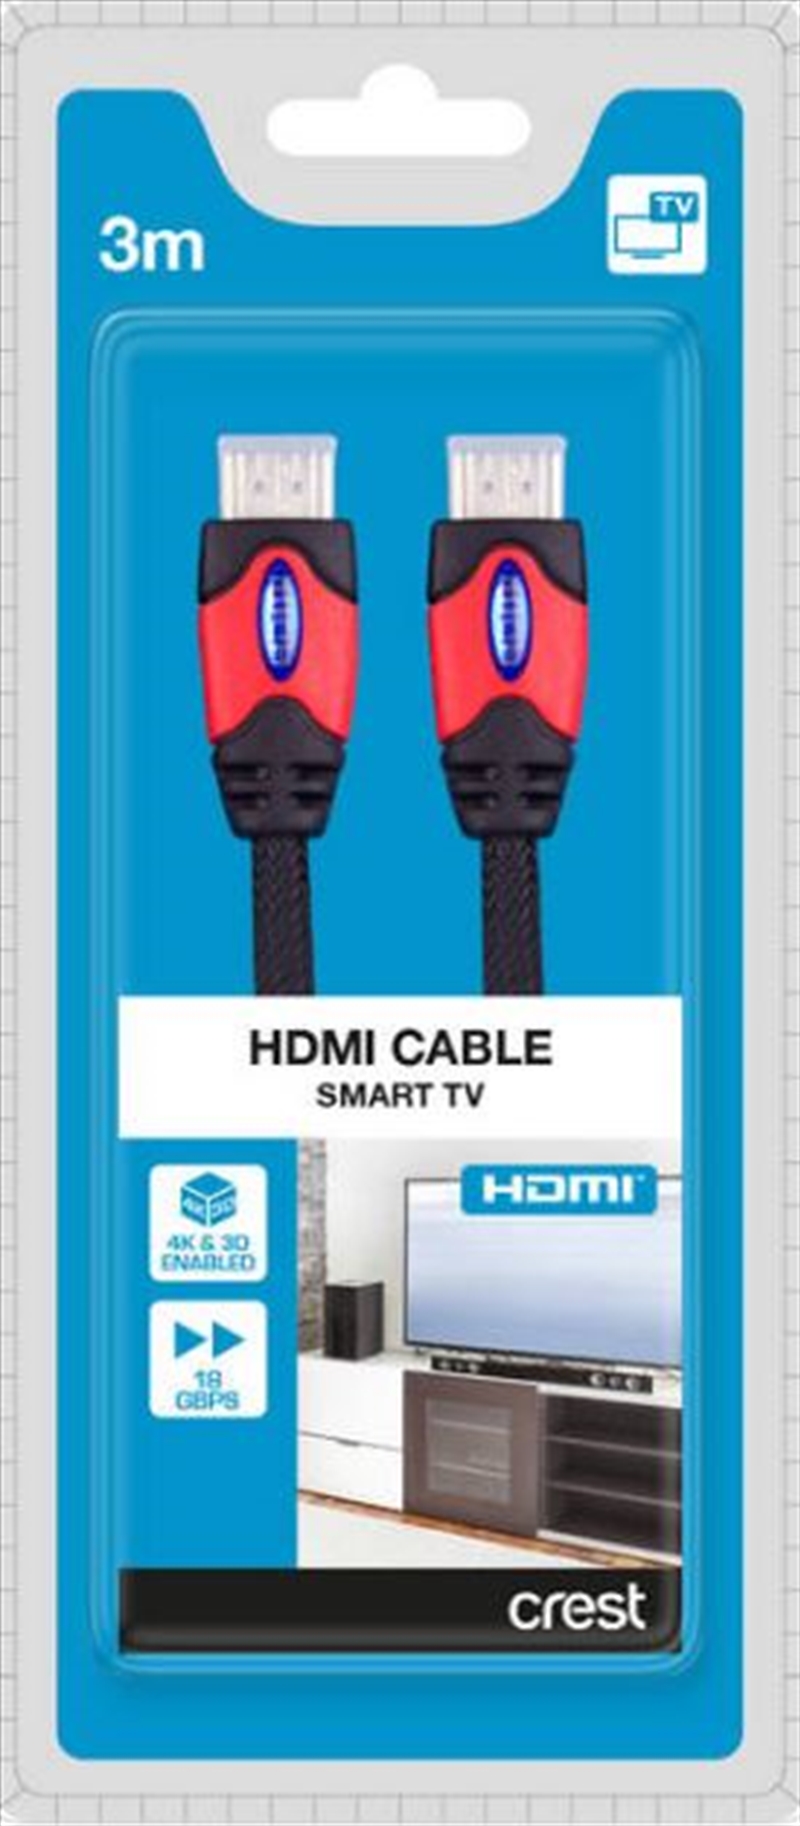 Ultra High Speed HDMI Cable with Ethernet - 3M/Product Detail/Cables